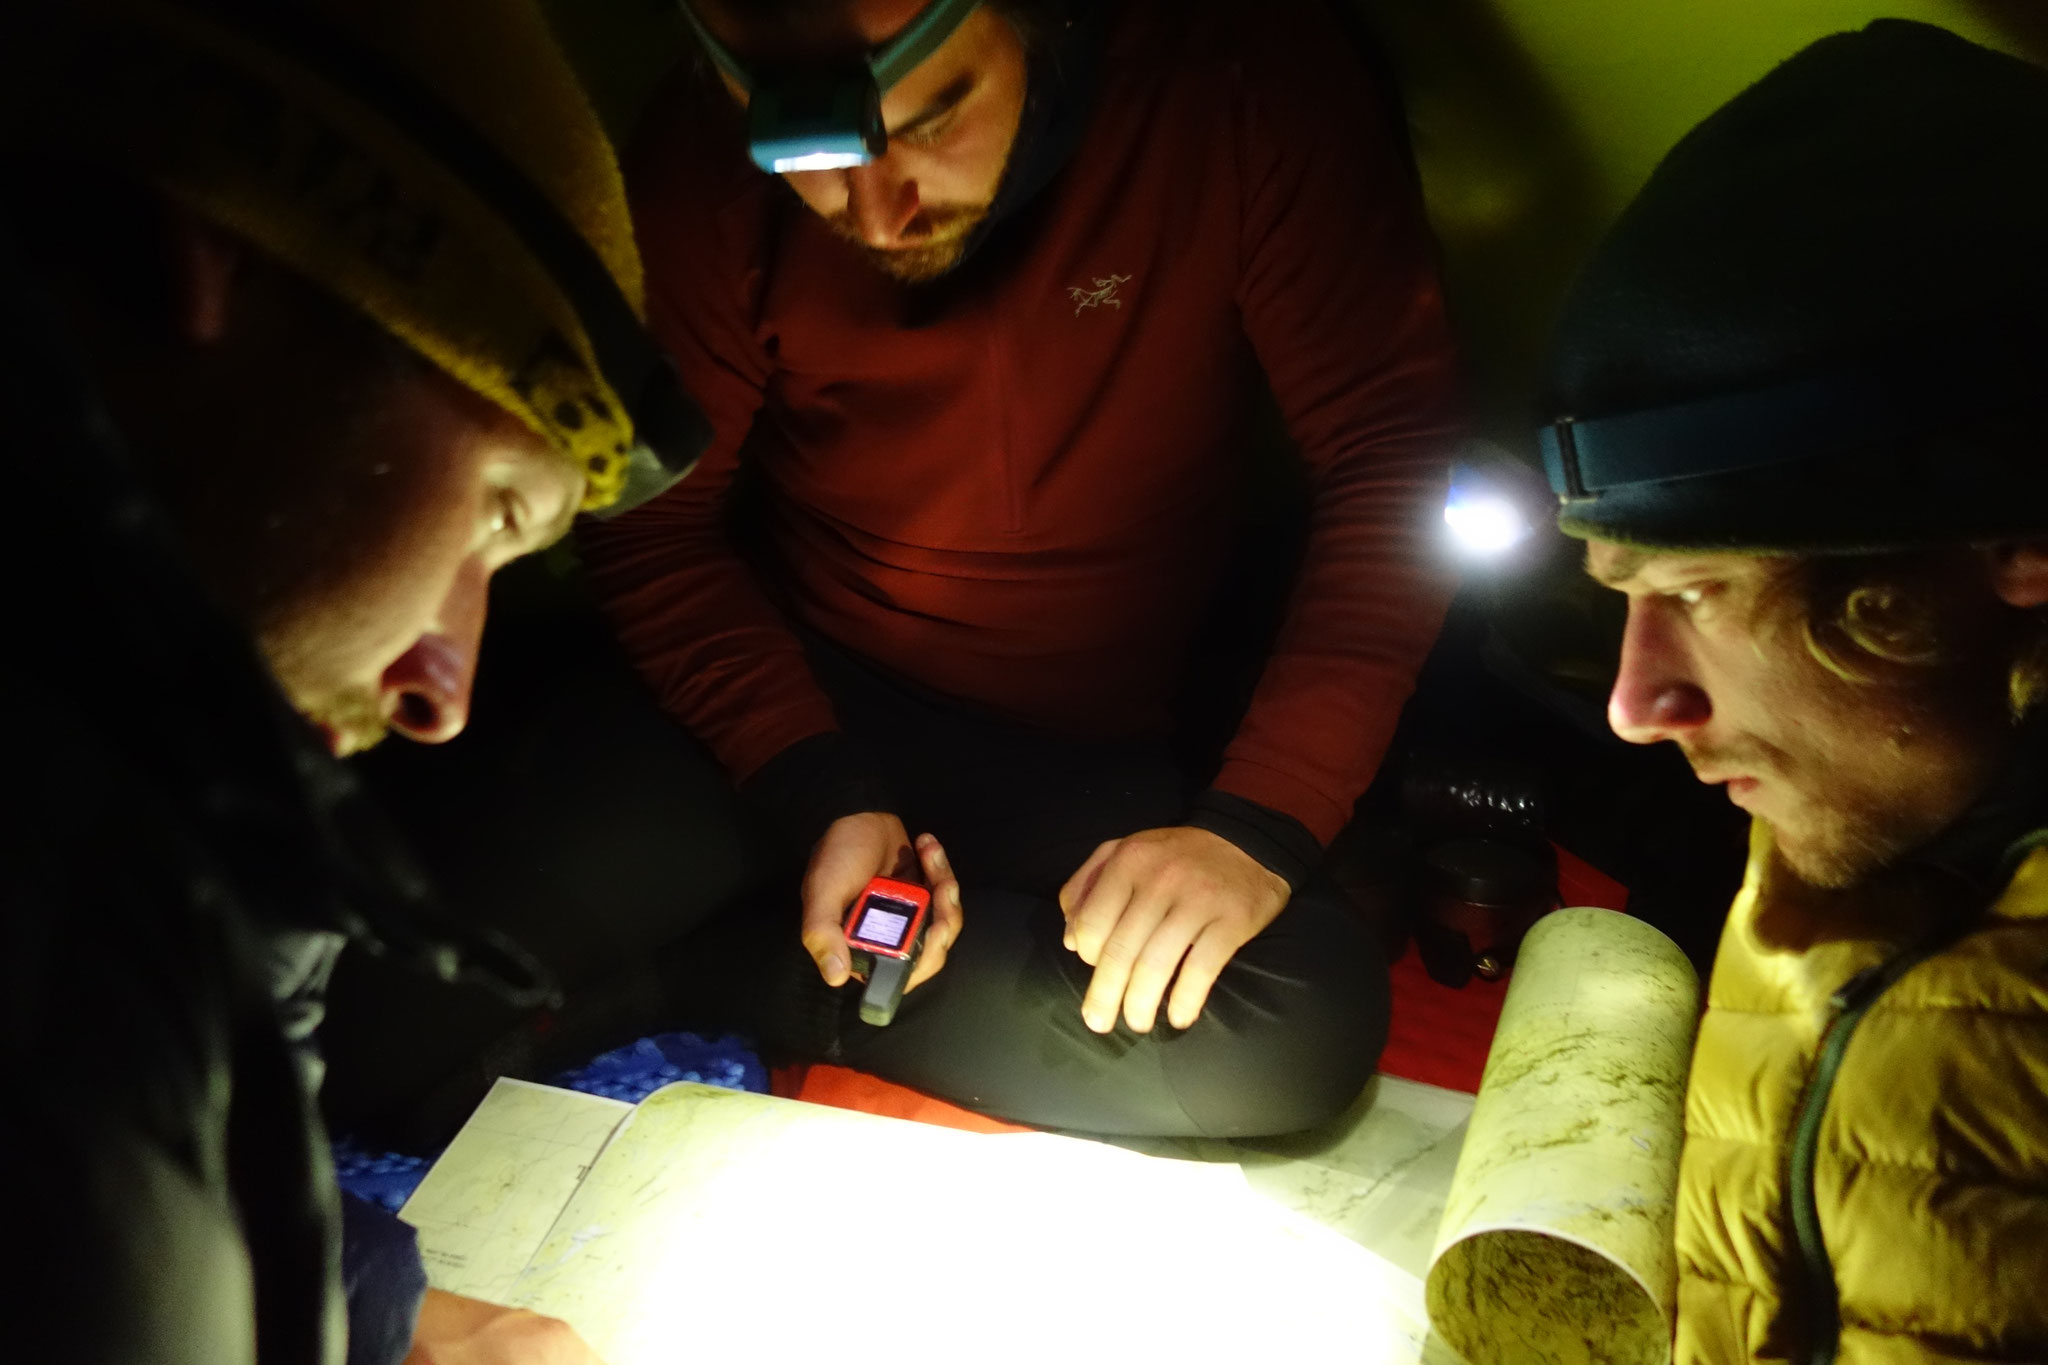 route planning in the tent